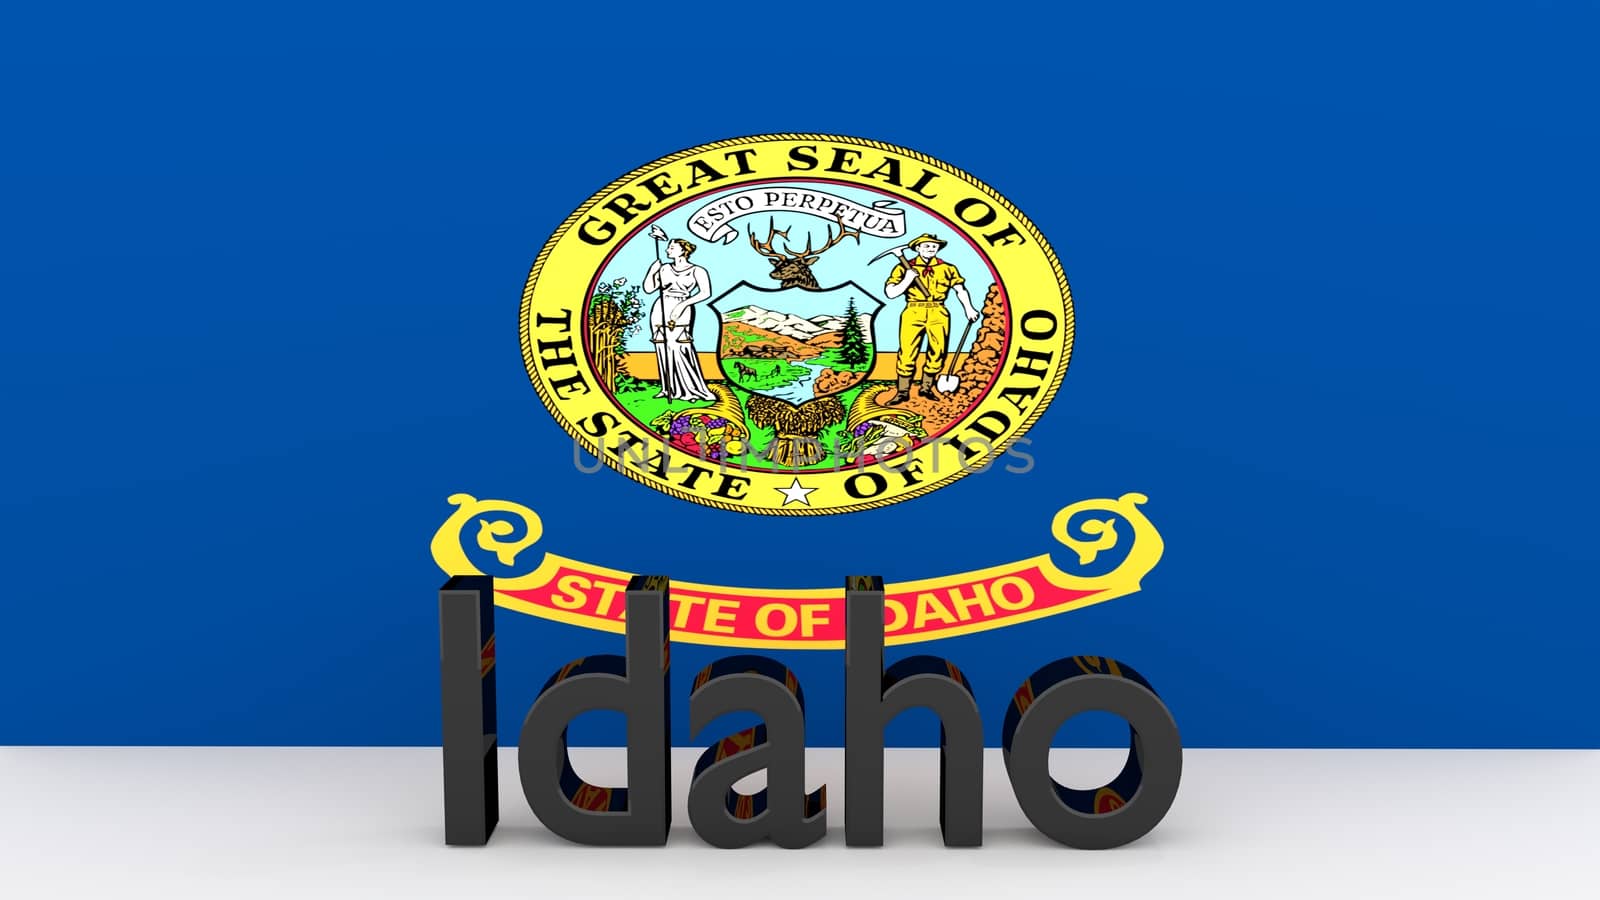 US state Idaho, metal name in front of flag by MarkDw